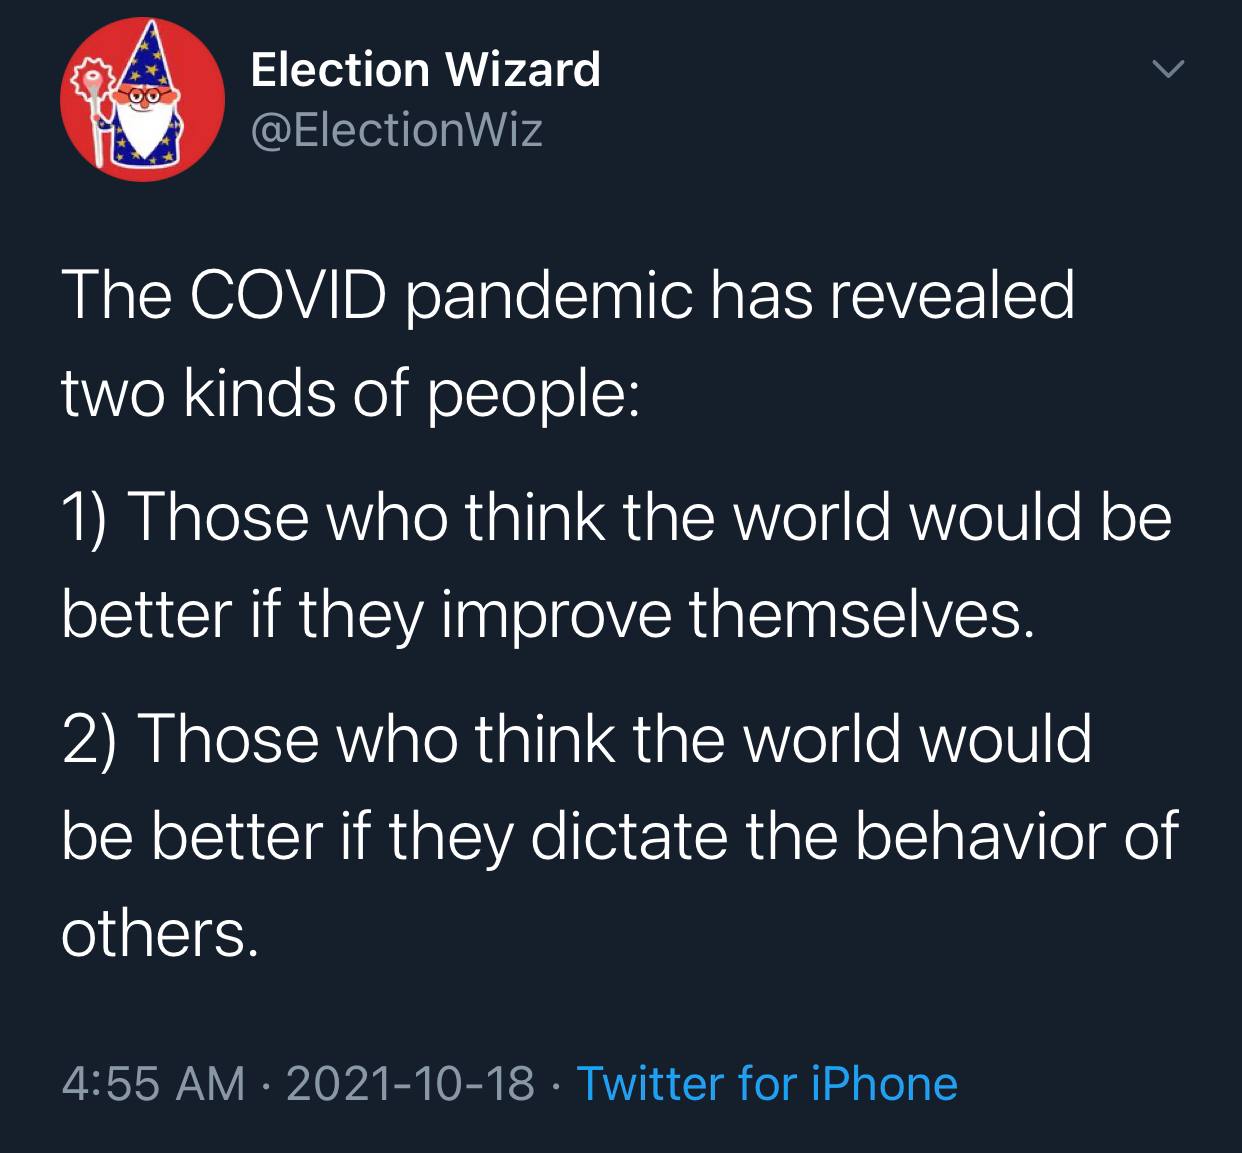 The pandemic revealed 2 kinds of people